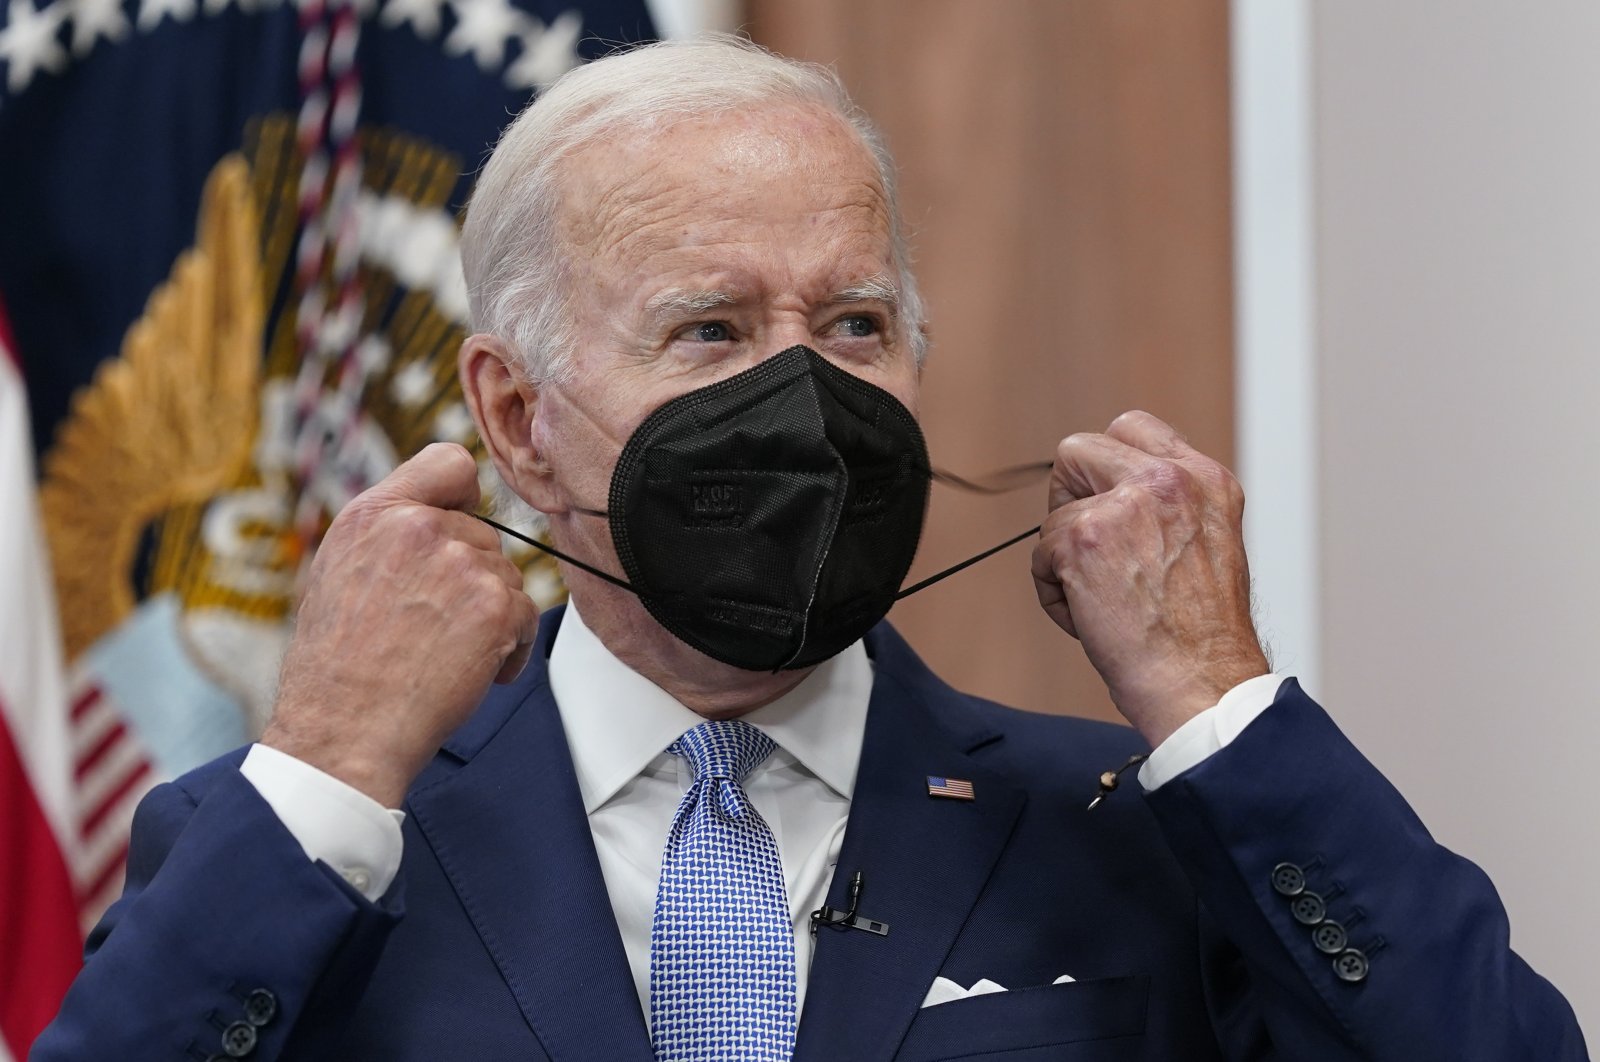 U.S. President Joe Biden removes his face mask as he arrives to speak about the economy during a meeting with CEOs in the South Court Auditorium on the White House complex in Washington, July 28, 2022. (AP Photo)